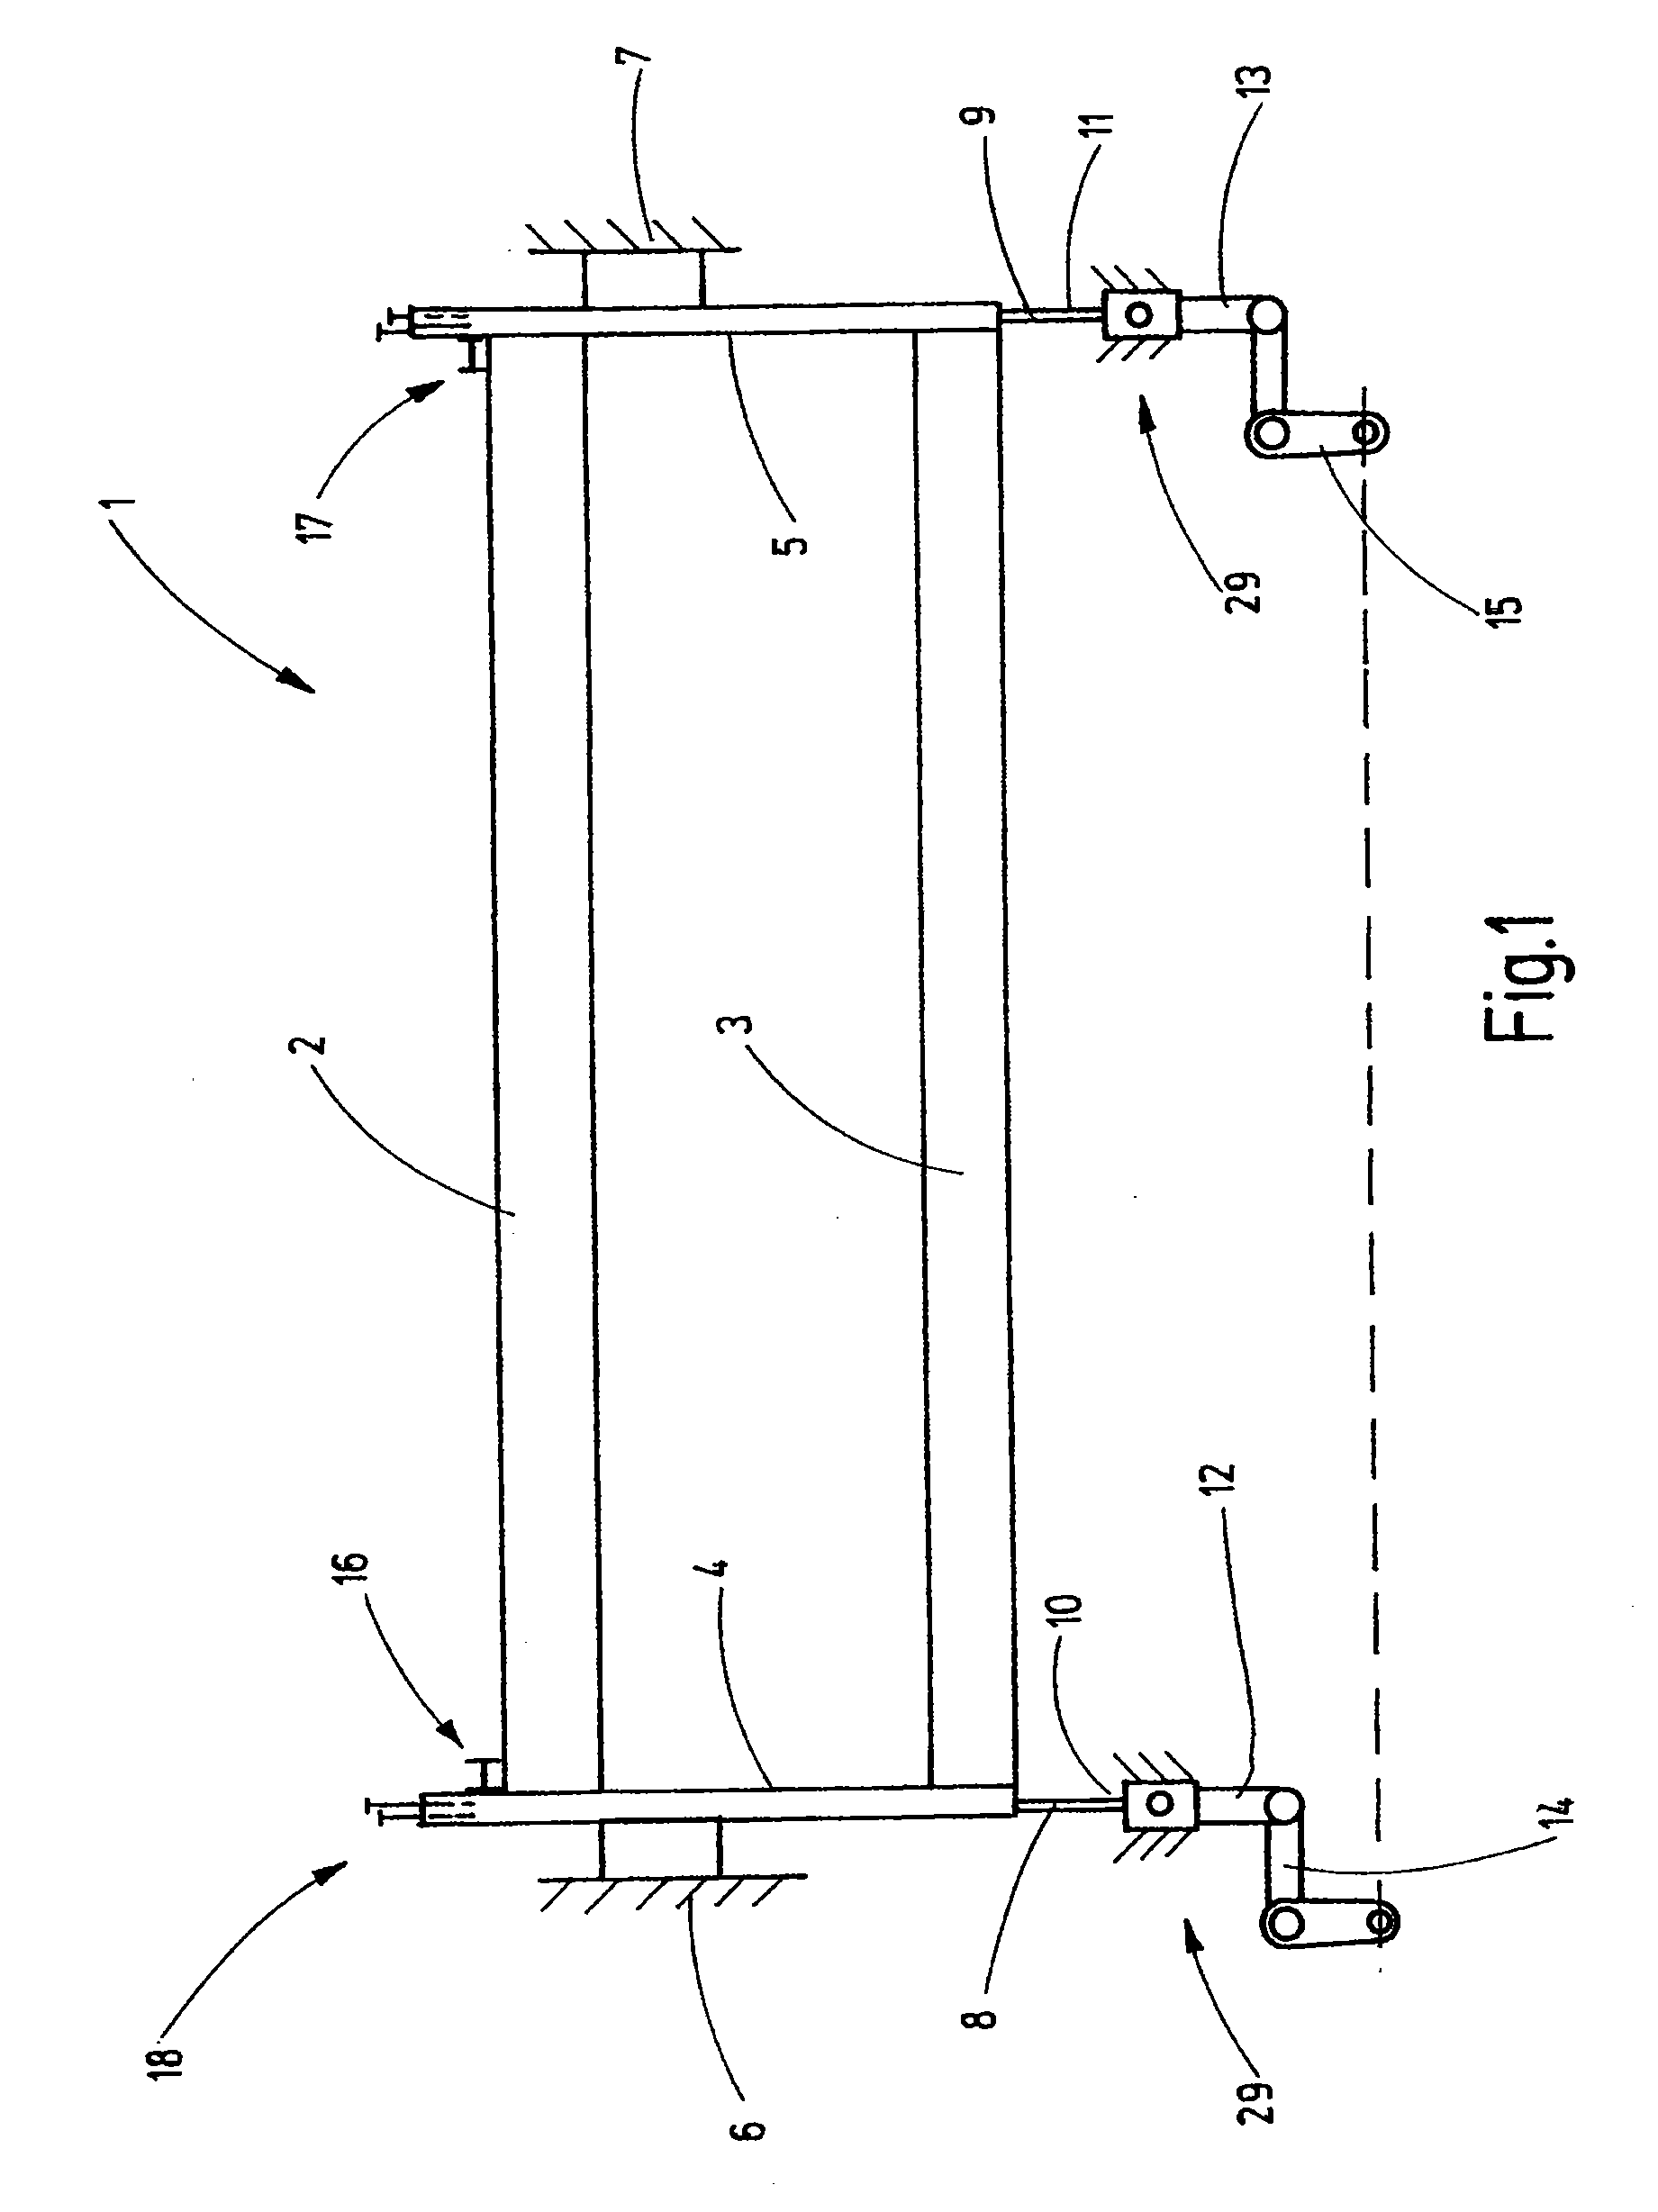 Shaft connecting device for a heald shaft